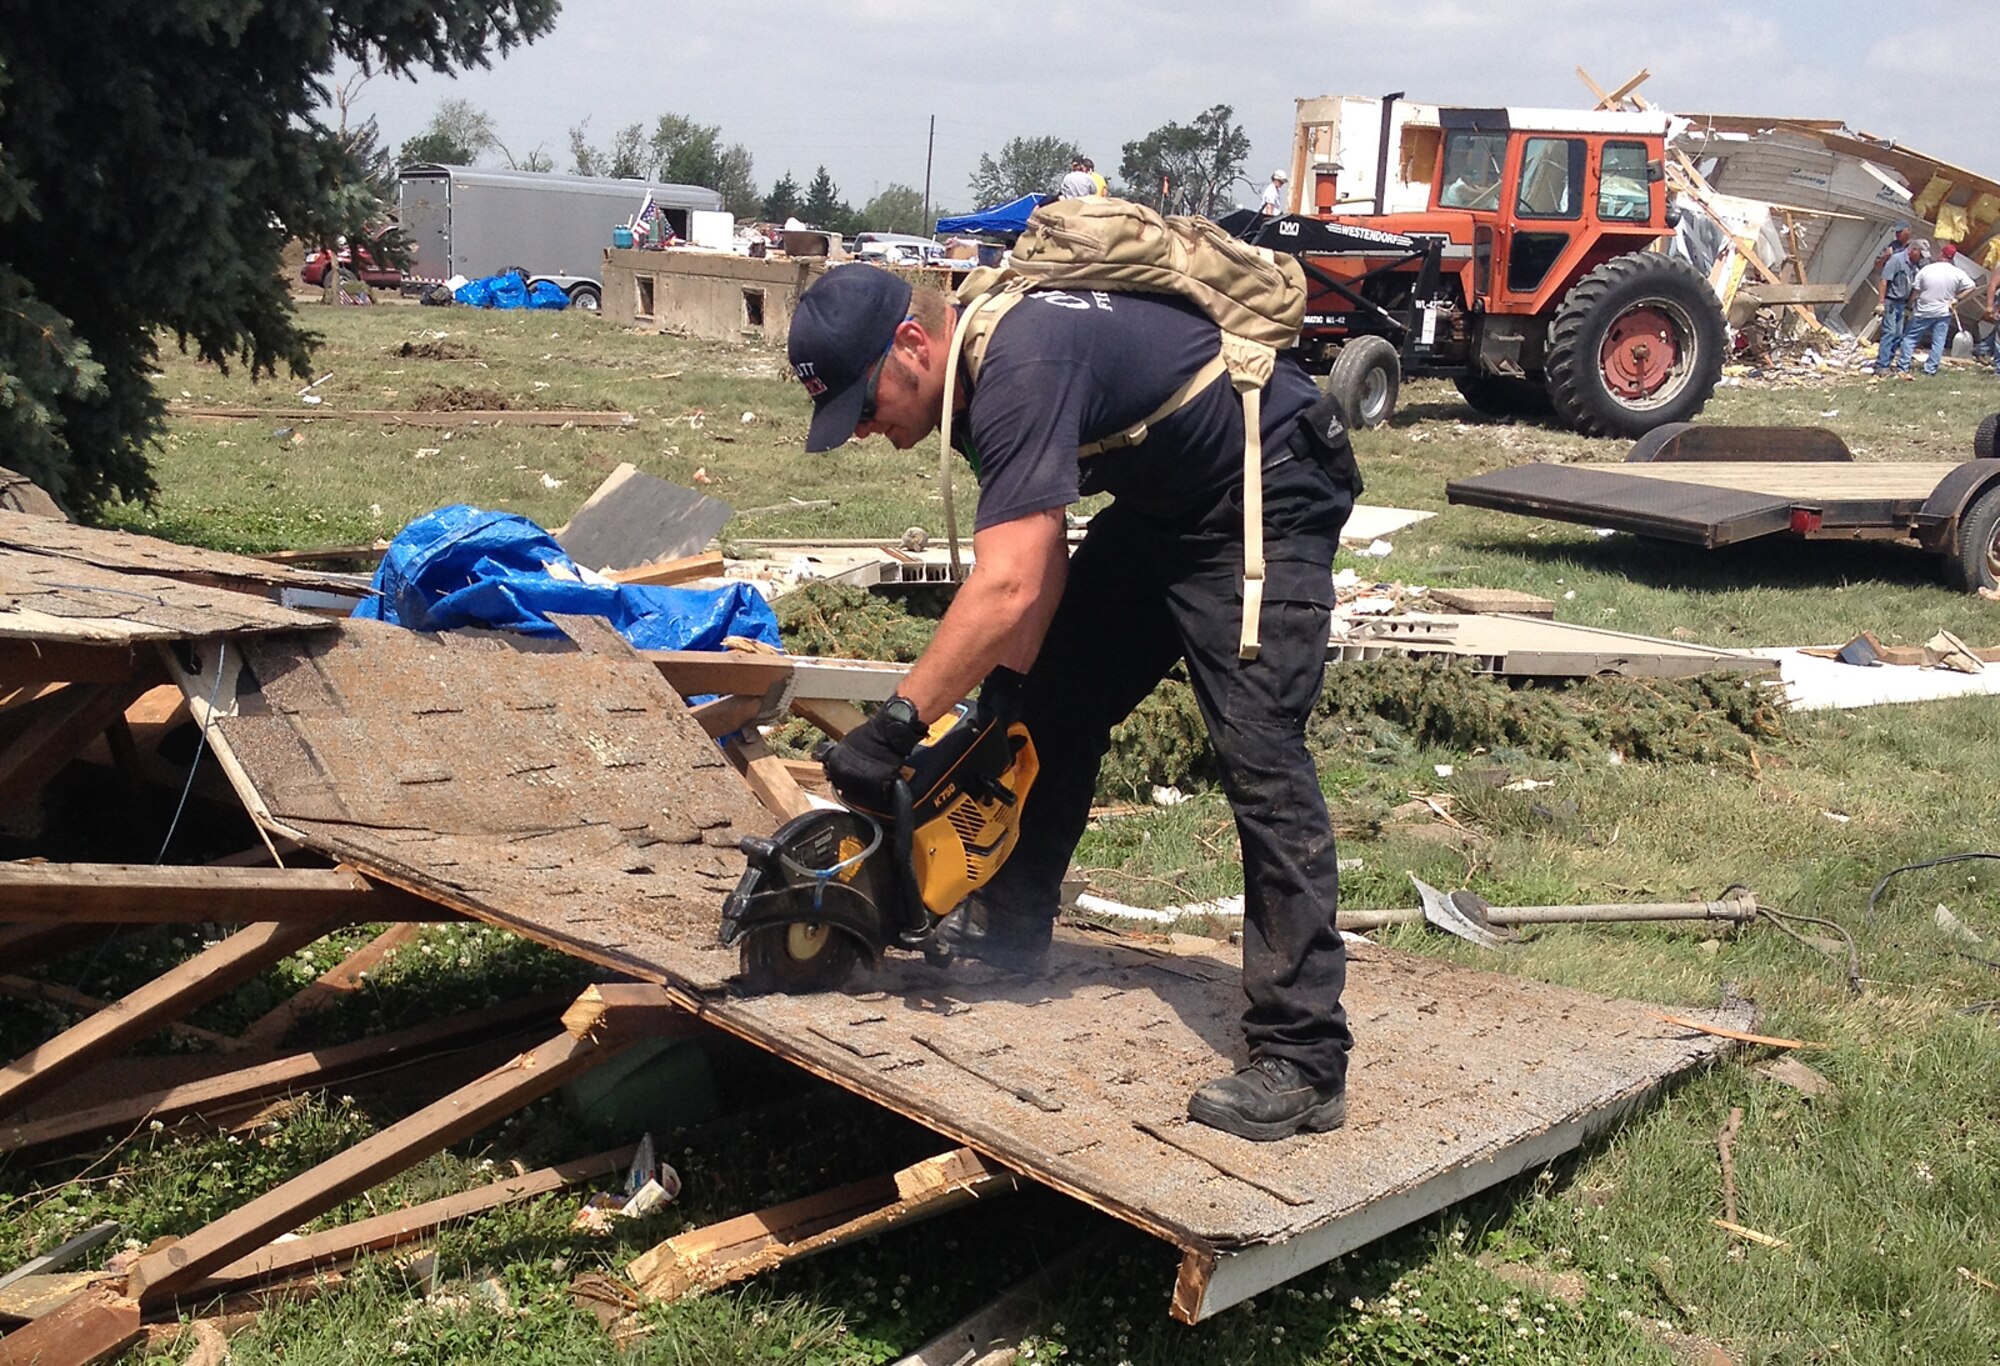 Ron Dawson, cuts debris with a K-12 saw June 18, 2014, in Pilger, Nebraska. Dawson was part of a group of volunteers from Offutt who helped with the cleanup efforts in Pilger following a tornado that destroyed approximately 75 percent of the town, June 16, 2014. Dawson is a firefighter from the 55th Civil Engineering Squadron. (Courtesy photo)